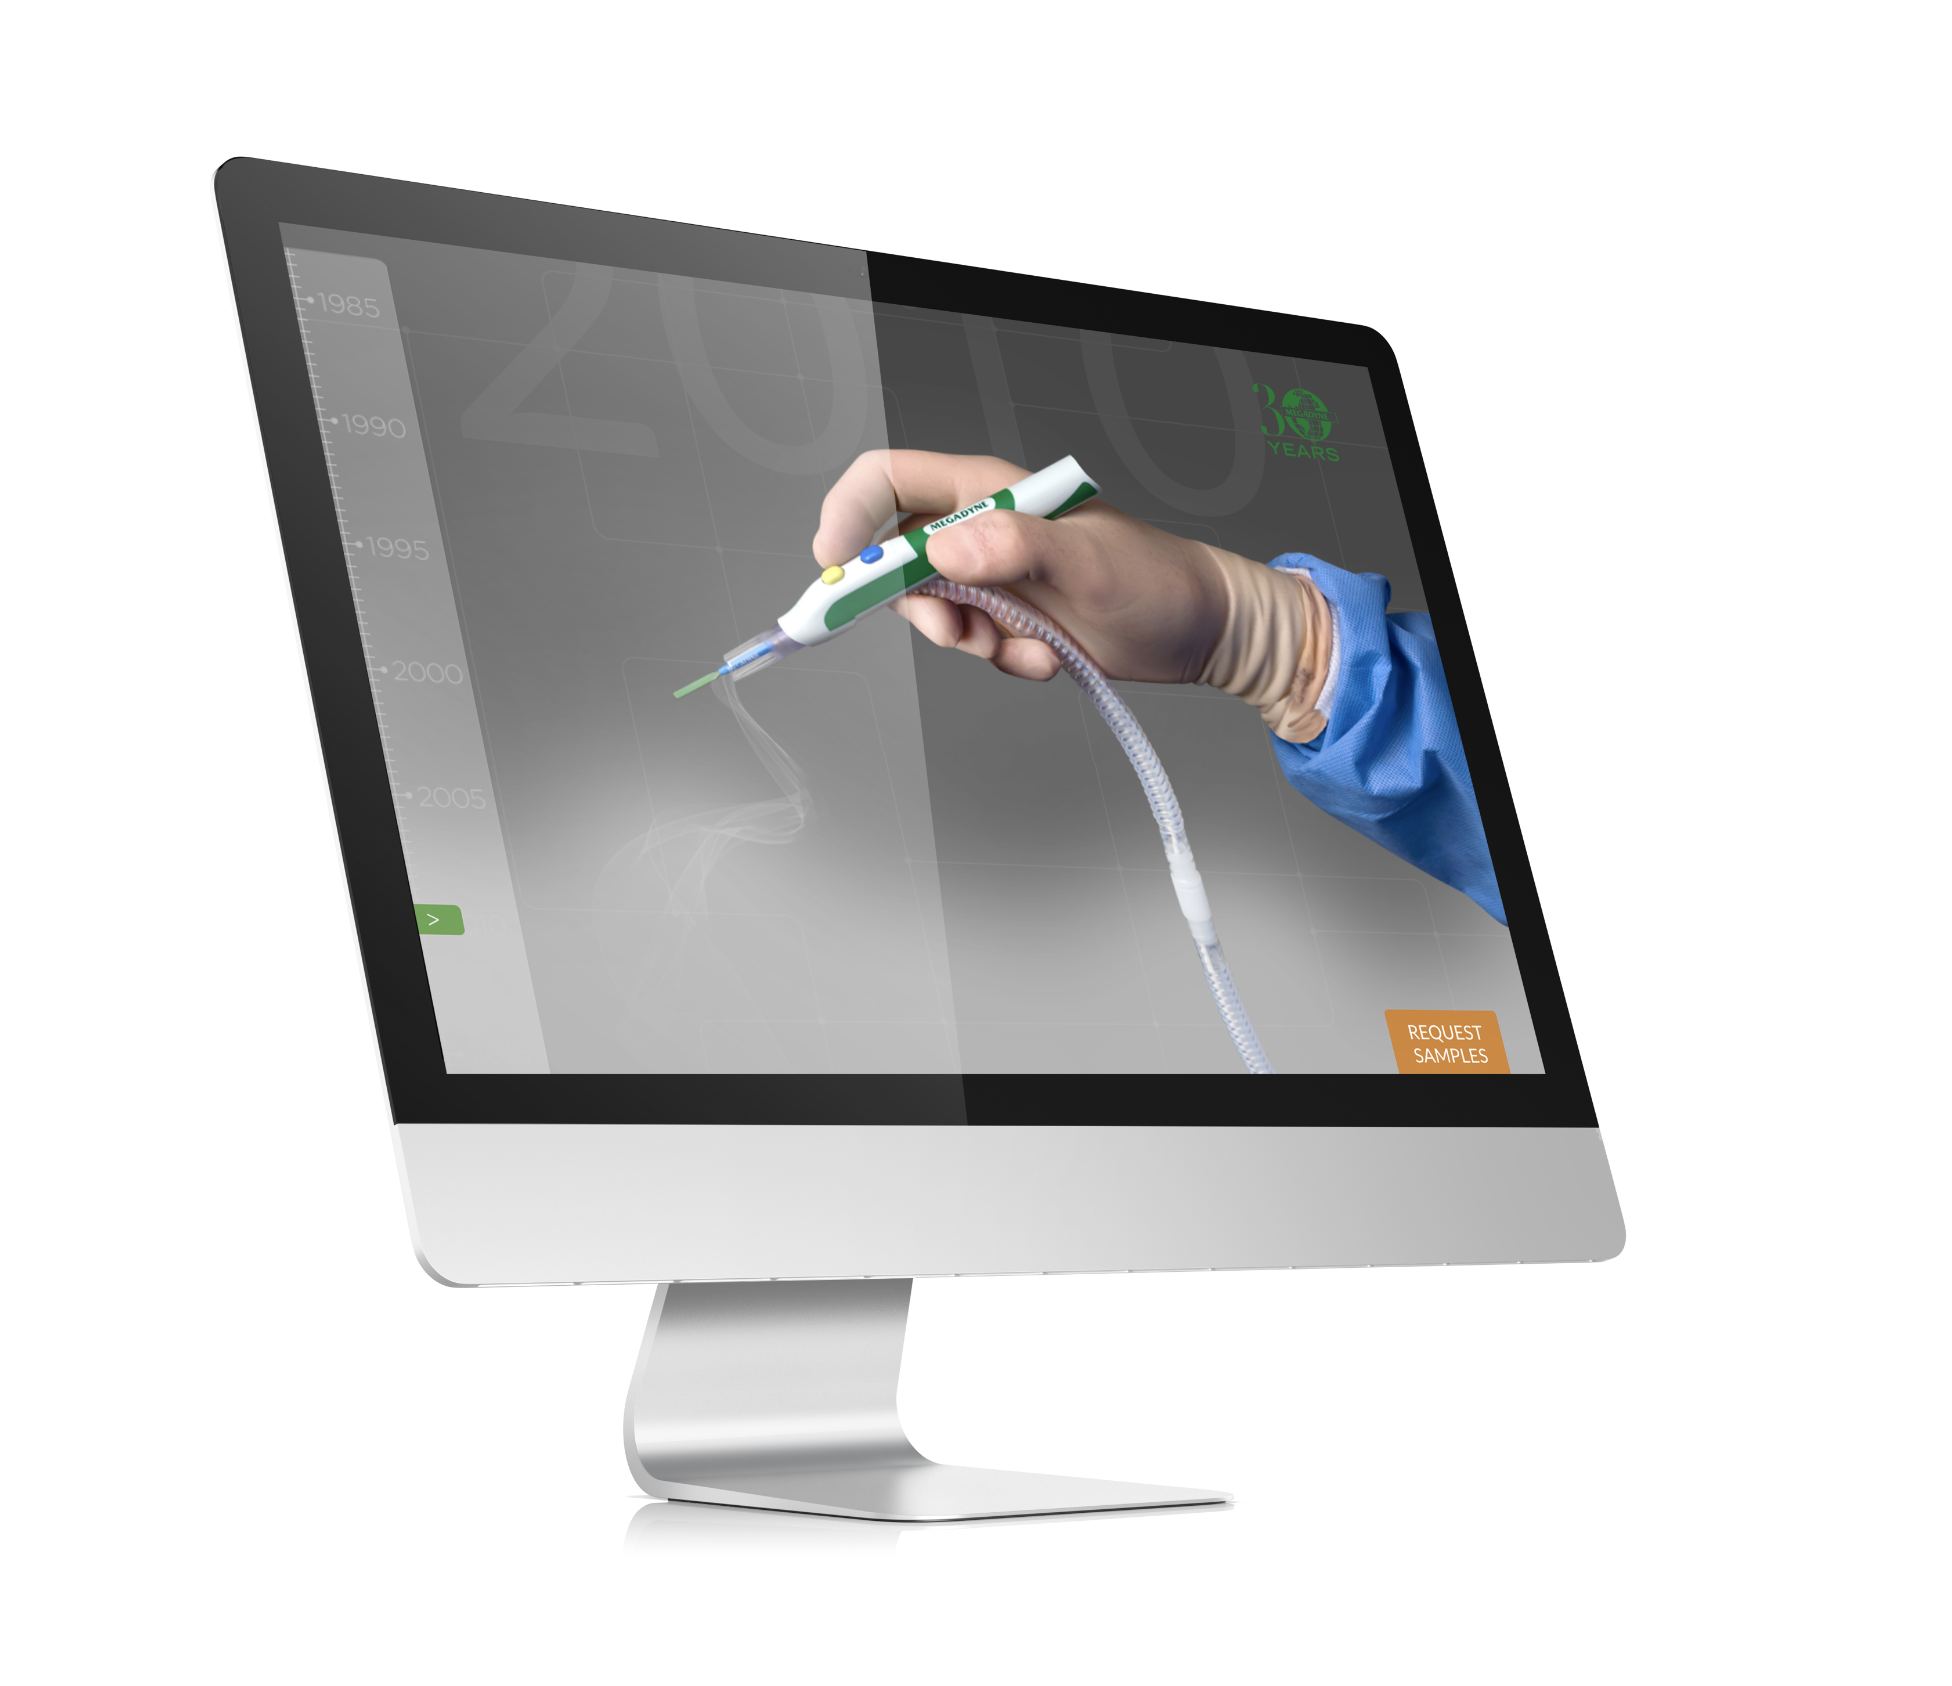 Doctor hand holding medical devide attached to tube with logo in top right, all placed on desktop mockup